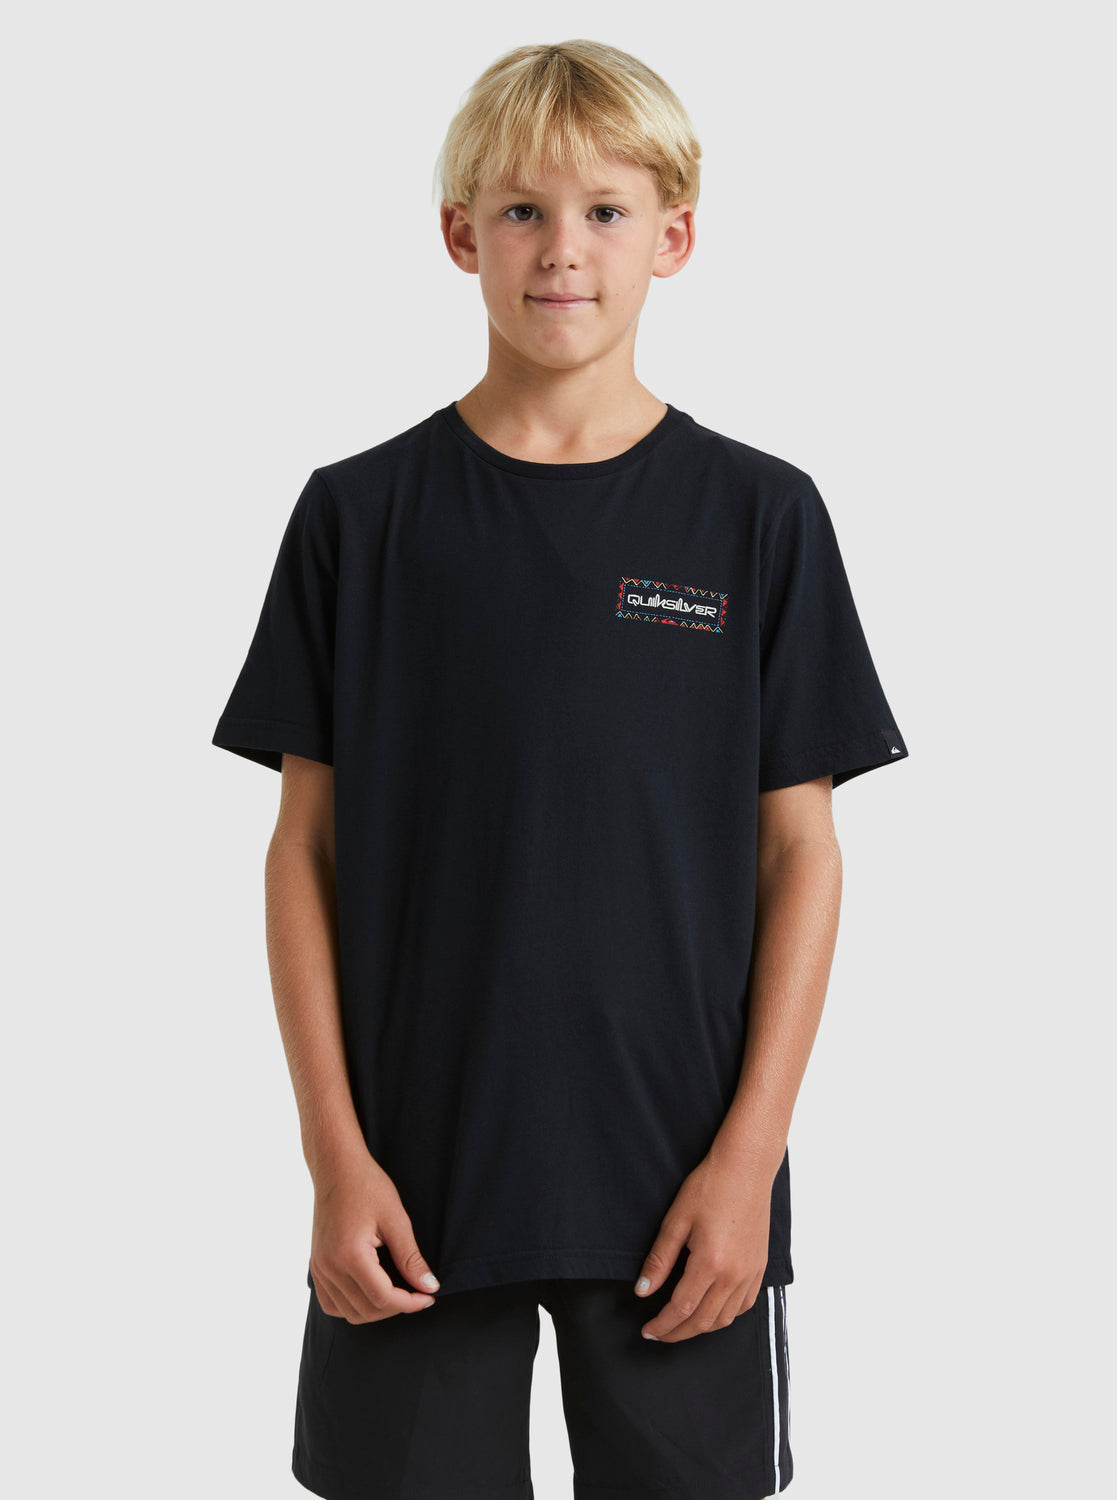 Quiksilver Second Reef Youth Tee in black from front